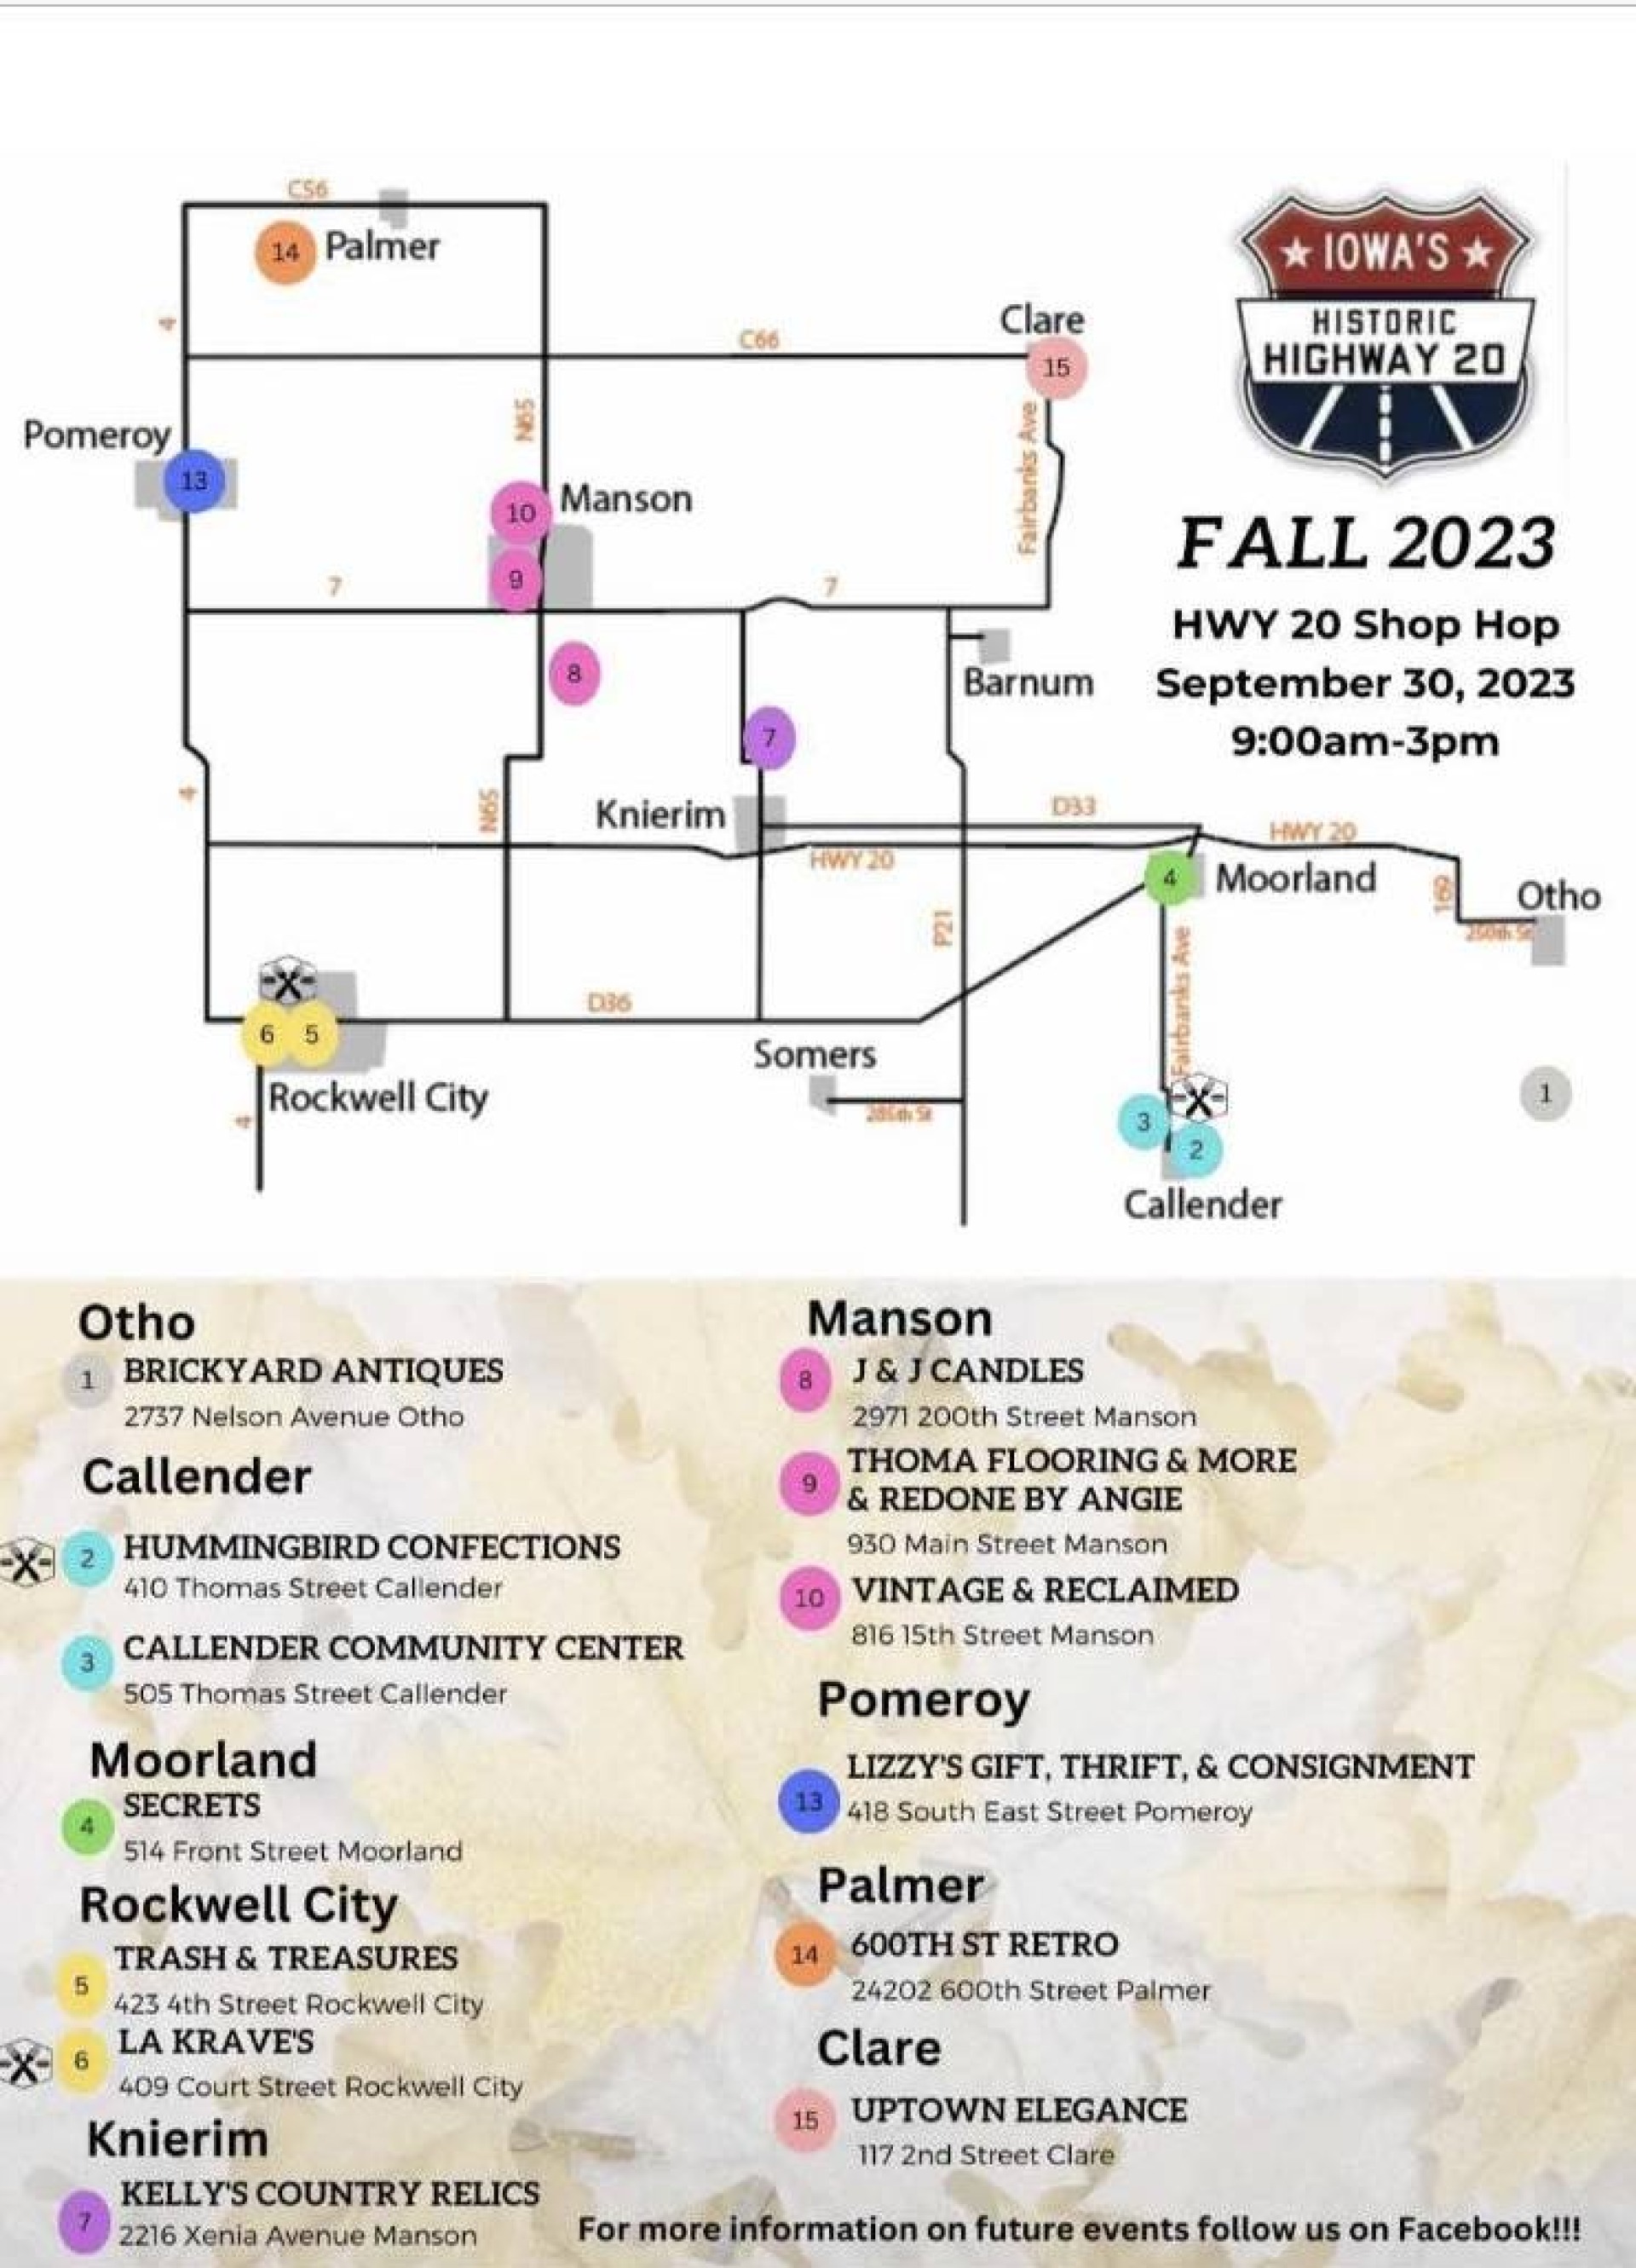 Fall 2023 HWY 20 Shop Hop Map and Shop List